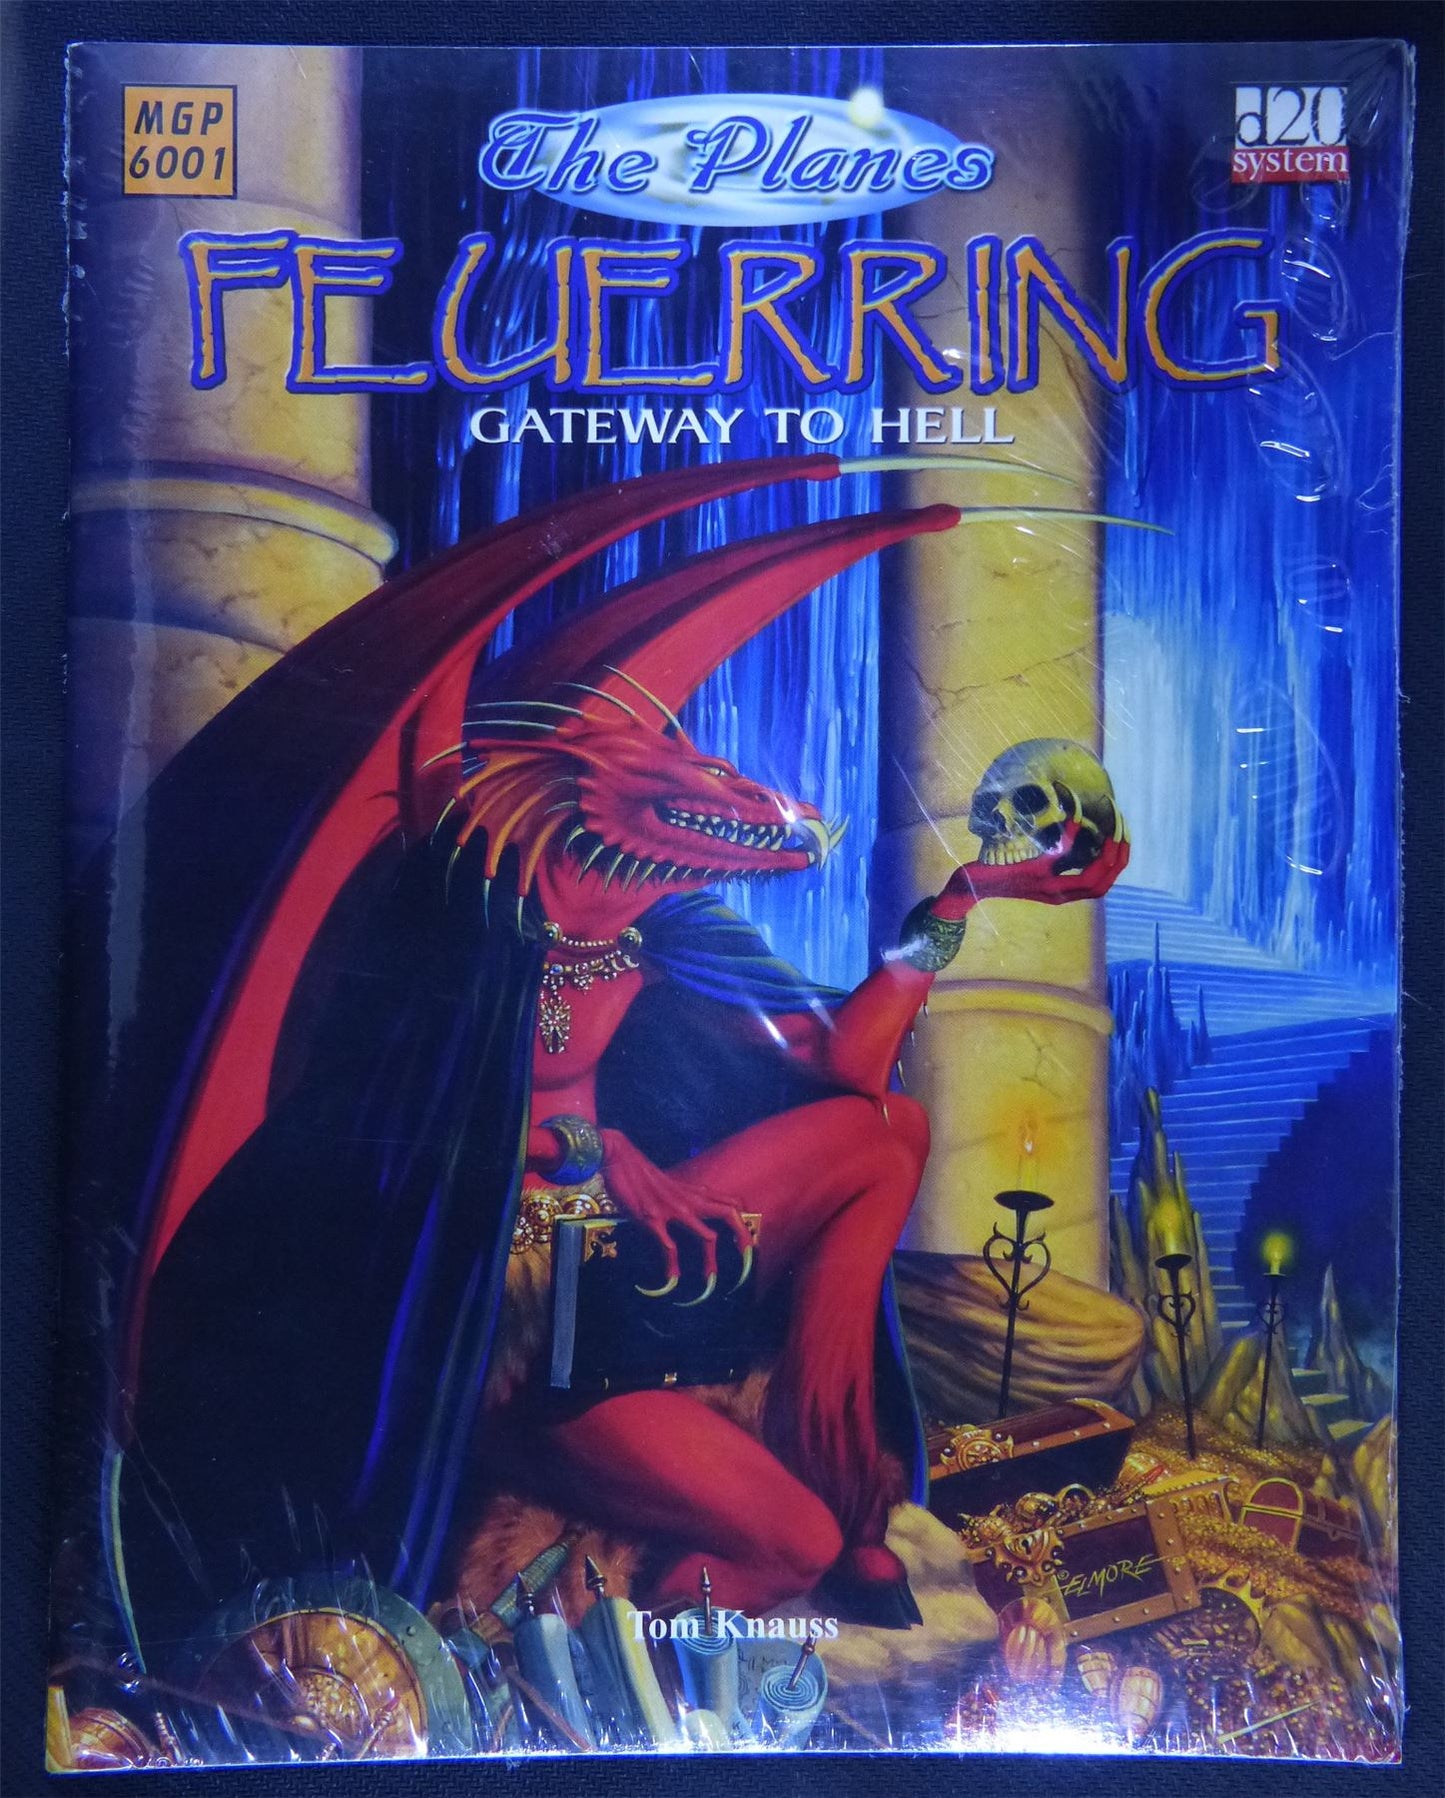 Feuerring - Gateway To Hell - D20 System - Roleplay - RPG #159